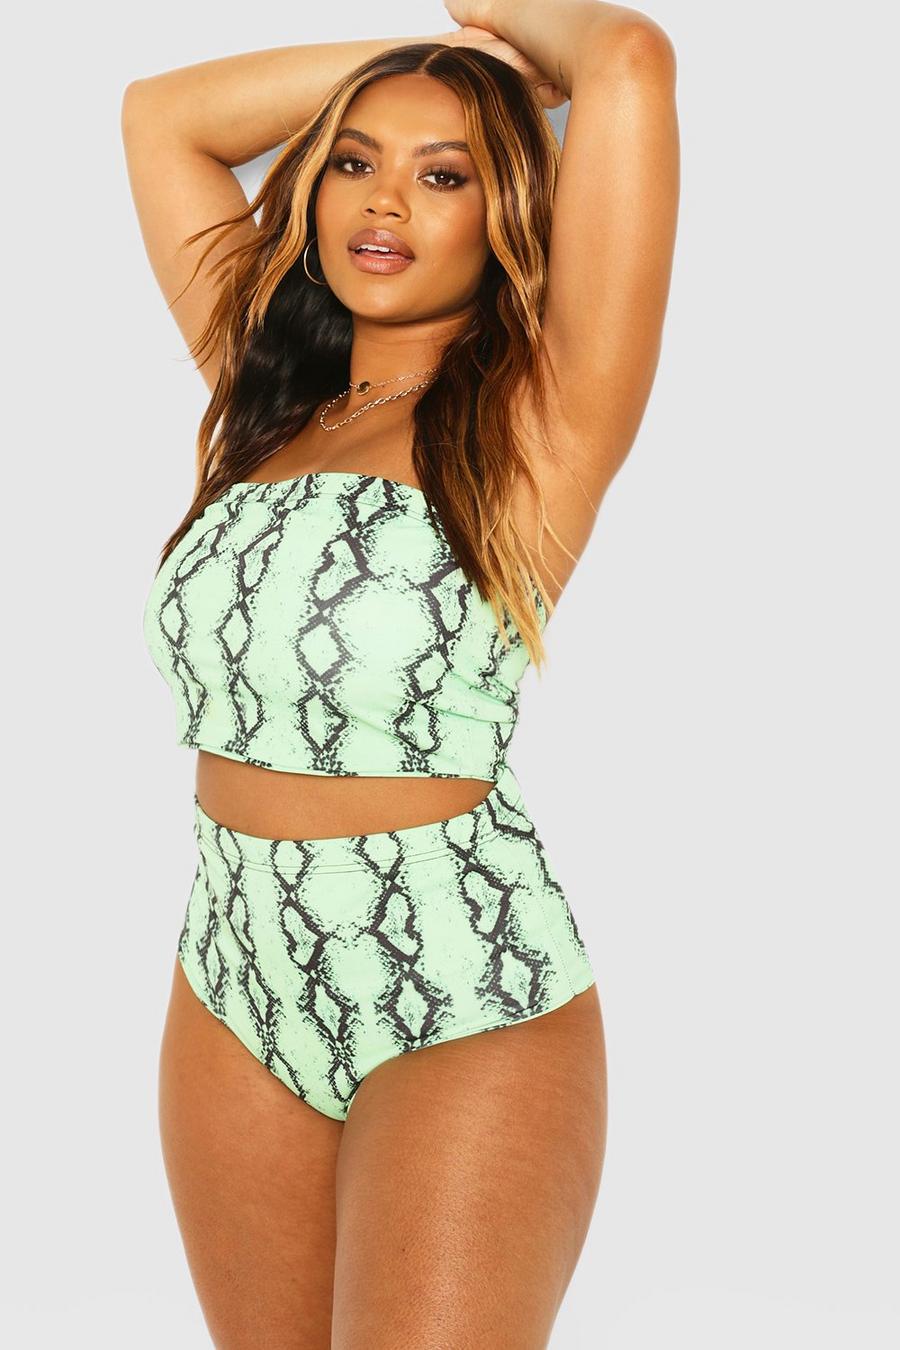 Large Bust Swimwear, Swimsuits for Large Busts